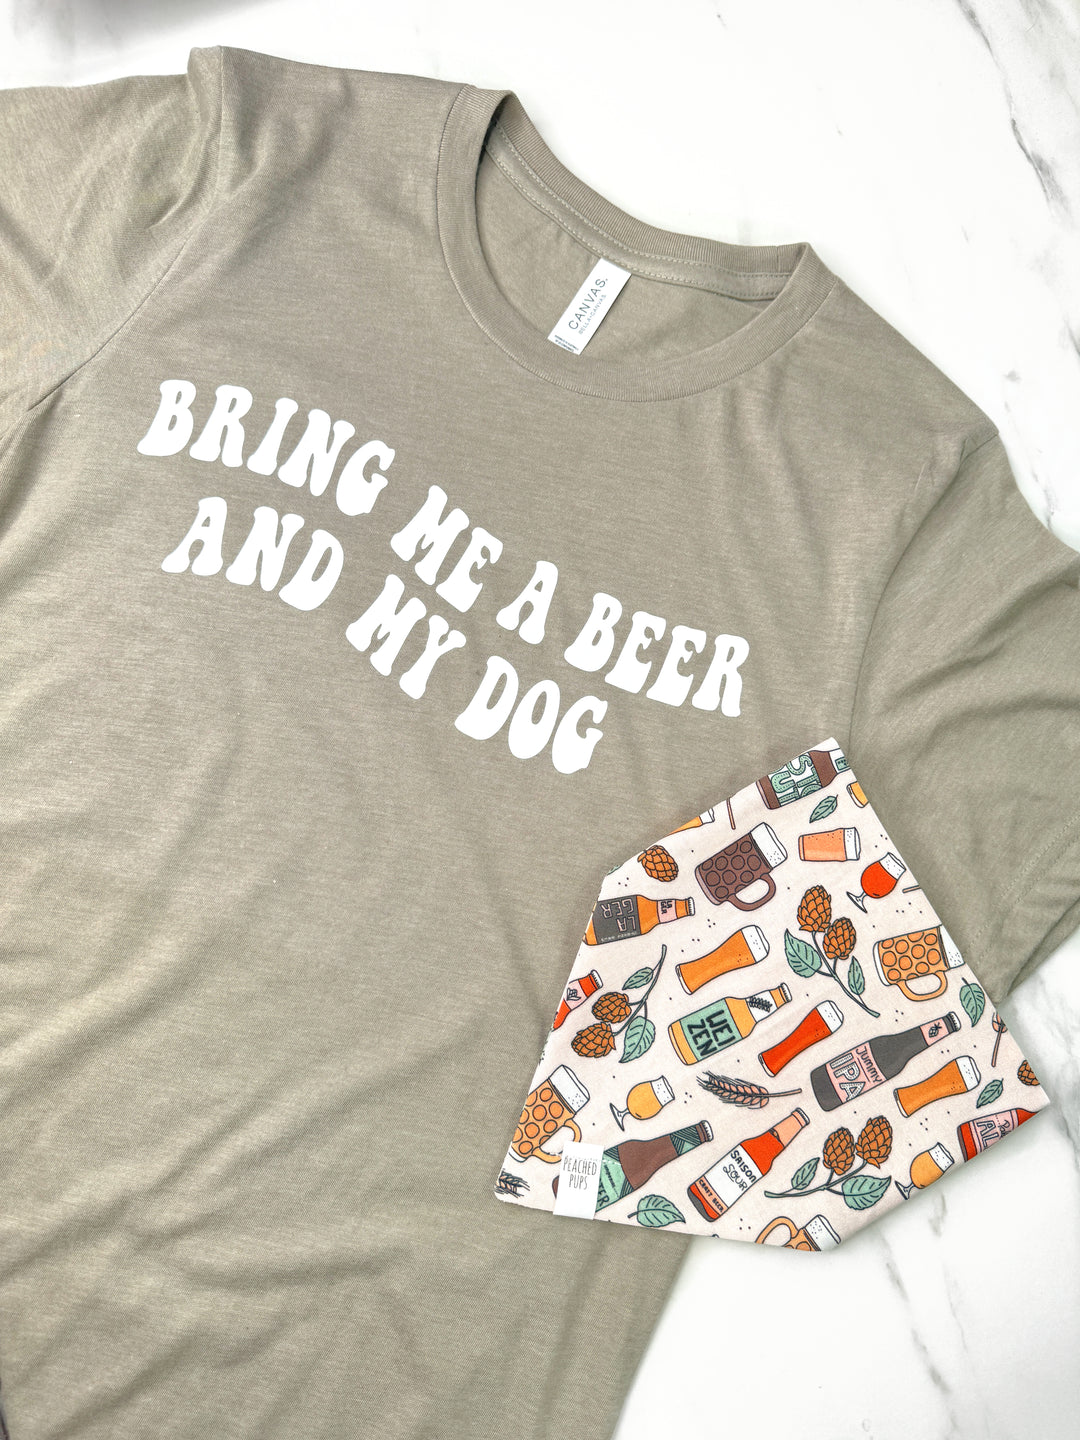 Bring Me A Beer And My Dog T-Shirt